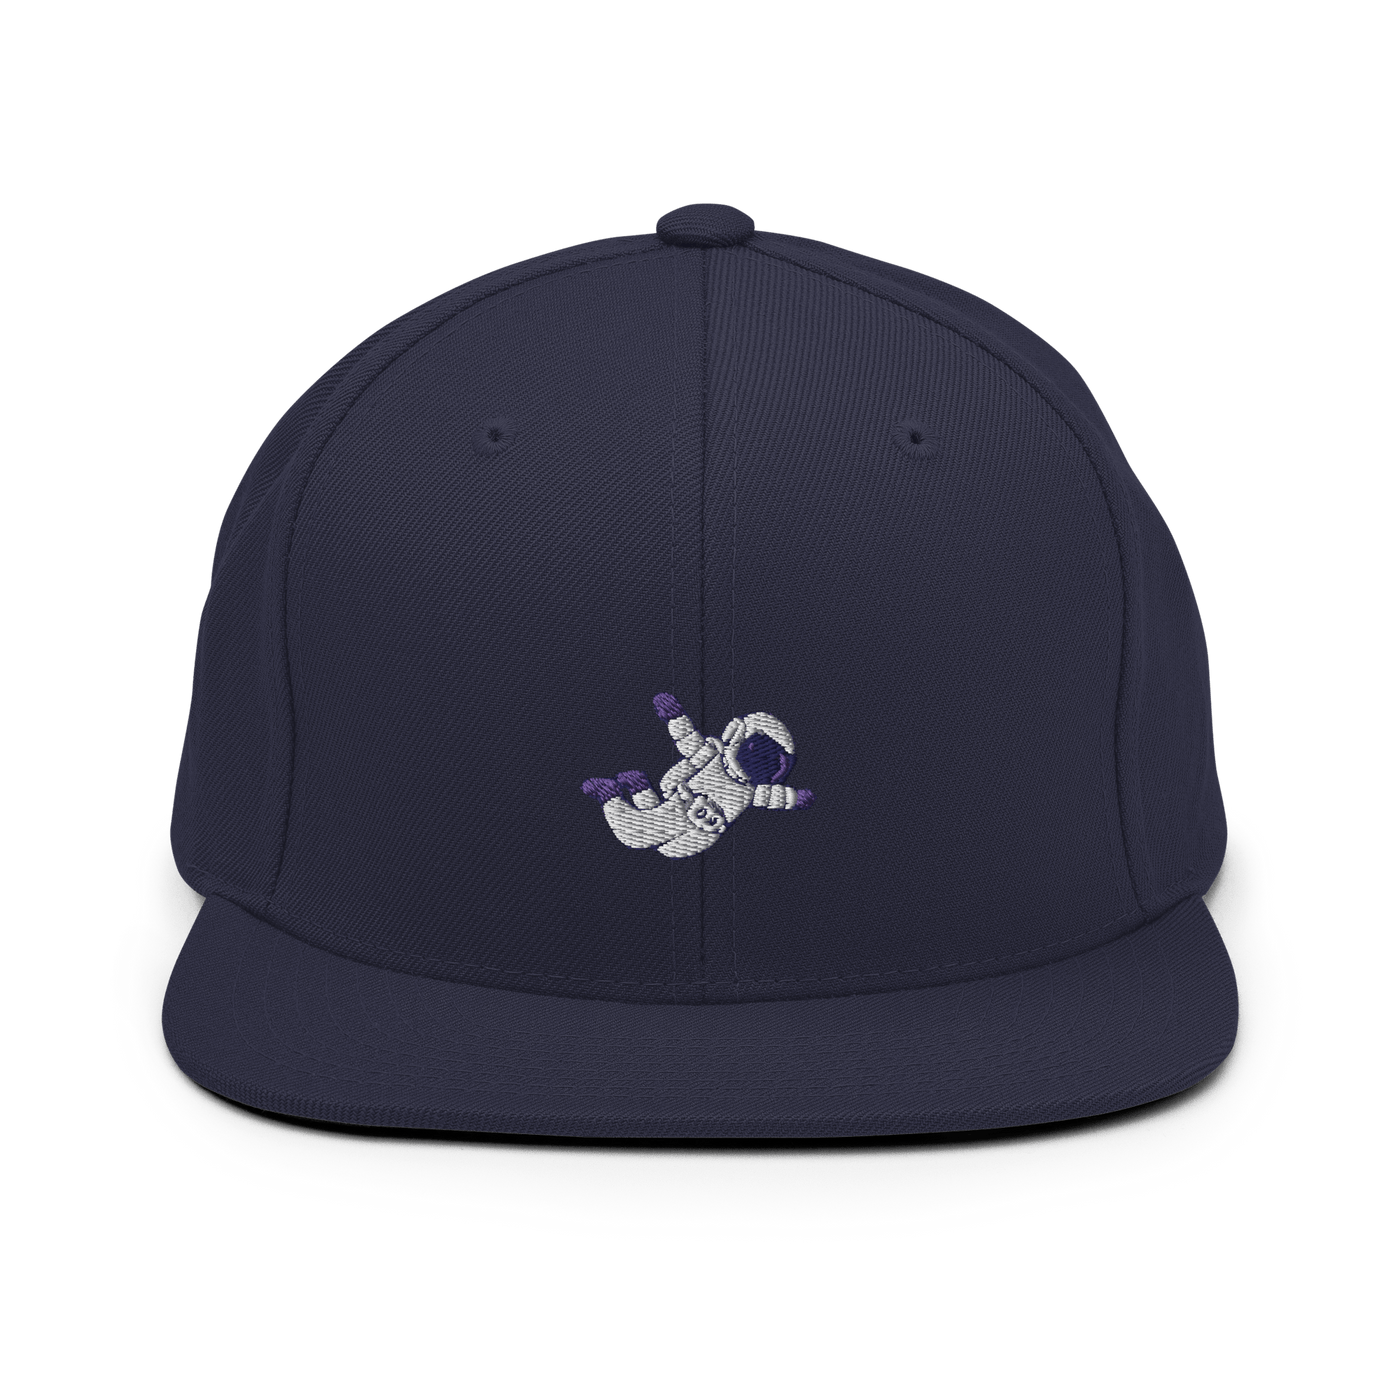 Astronaut Snapback Hat - Navy - - Just Another Cap Store